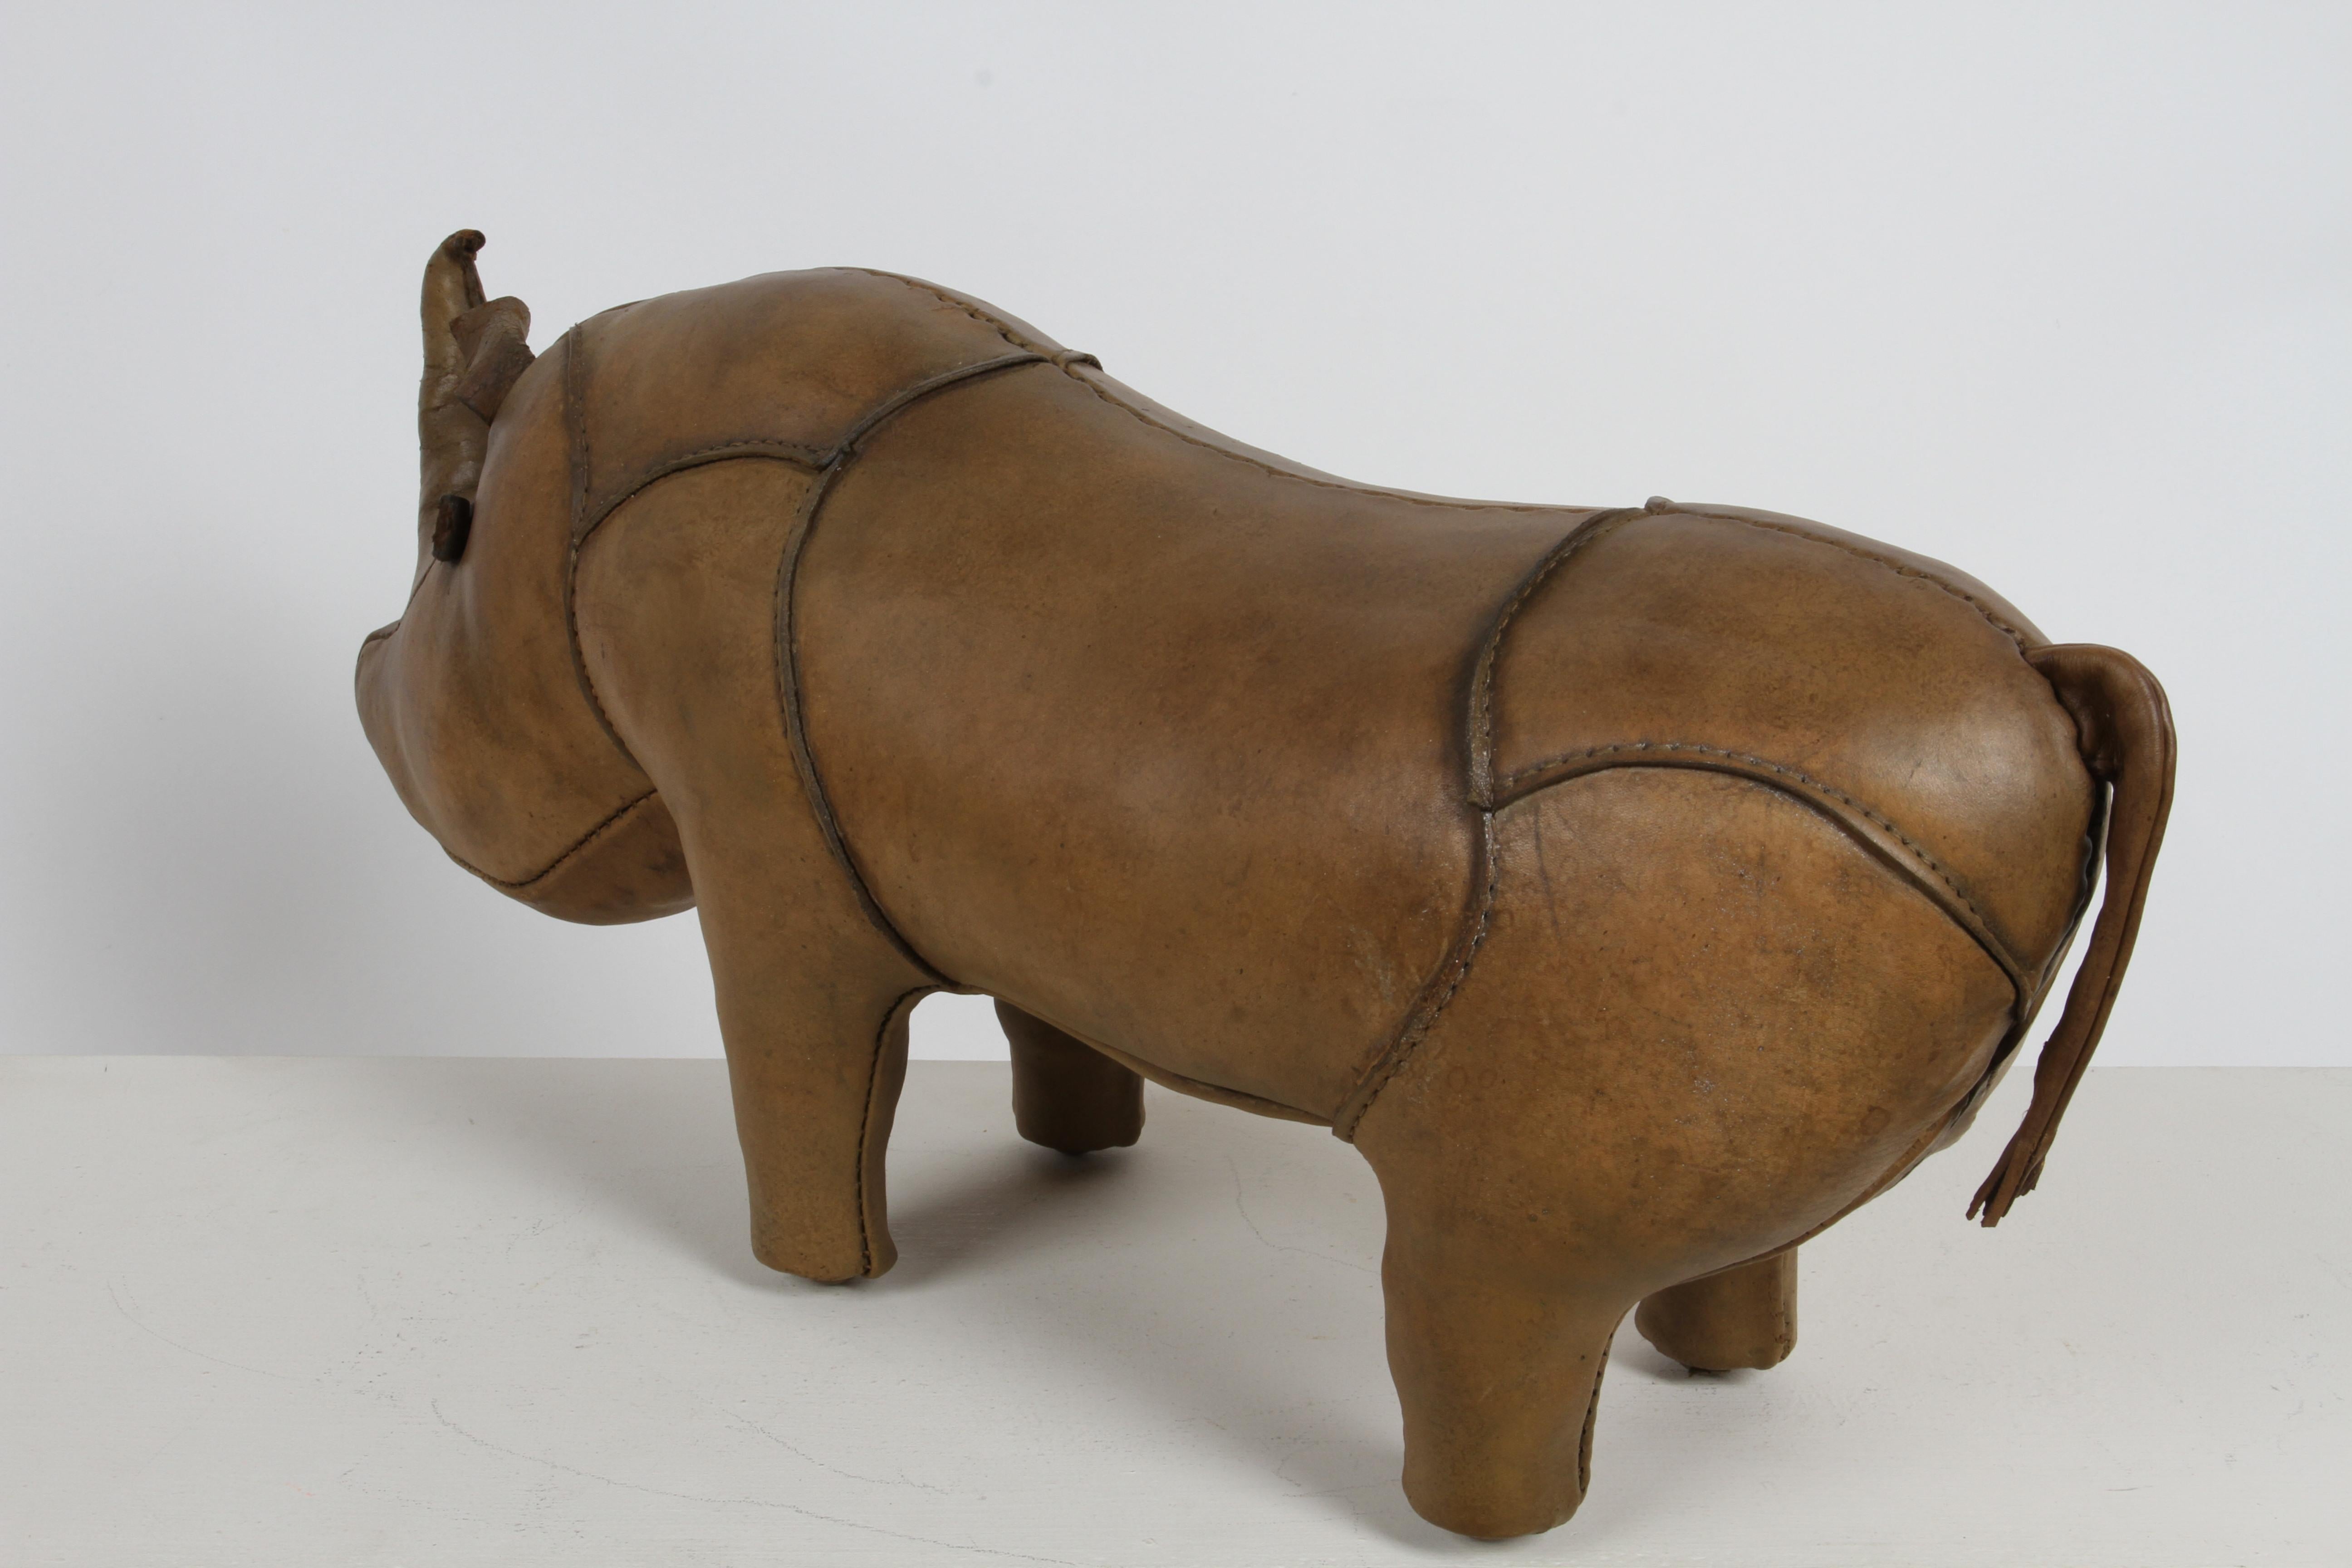 1960s Dimitri Omersa Leather Rhino Retailed by Abercrombie & Fitch - Restored For Sale 6